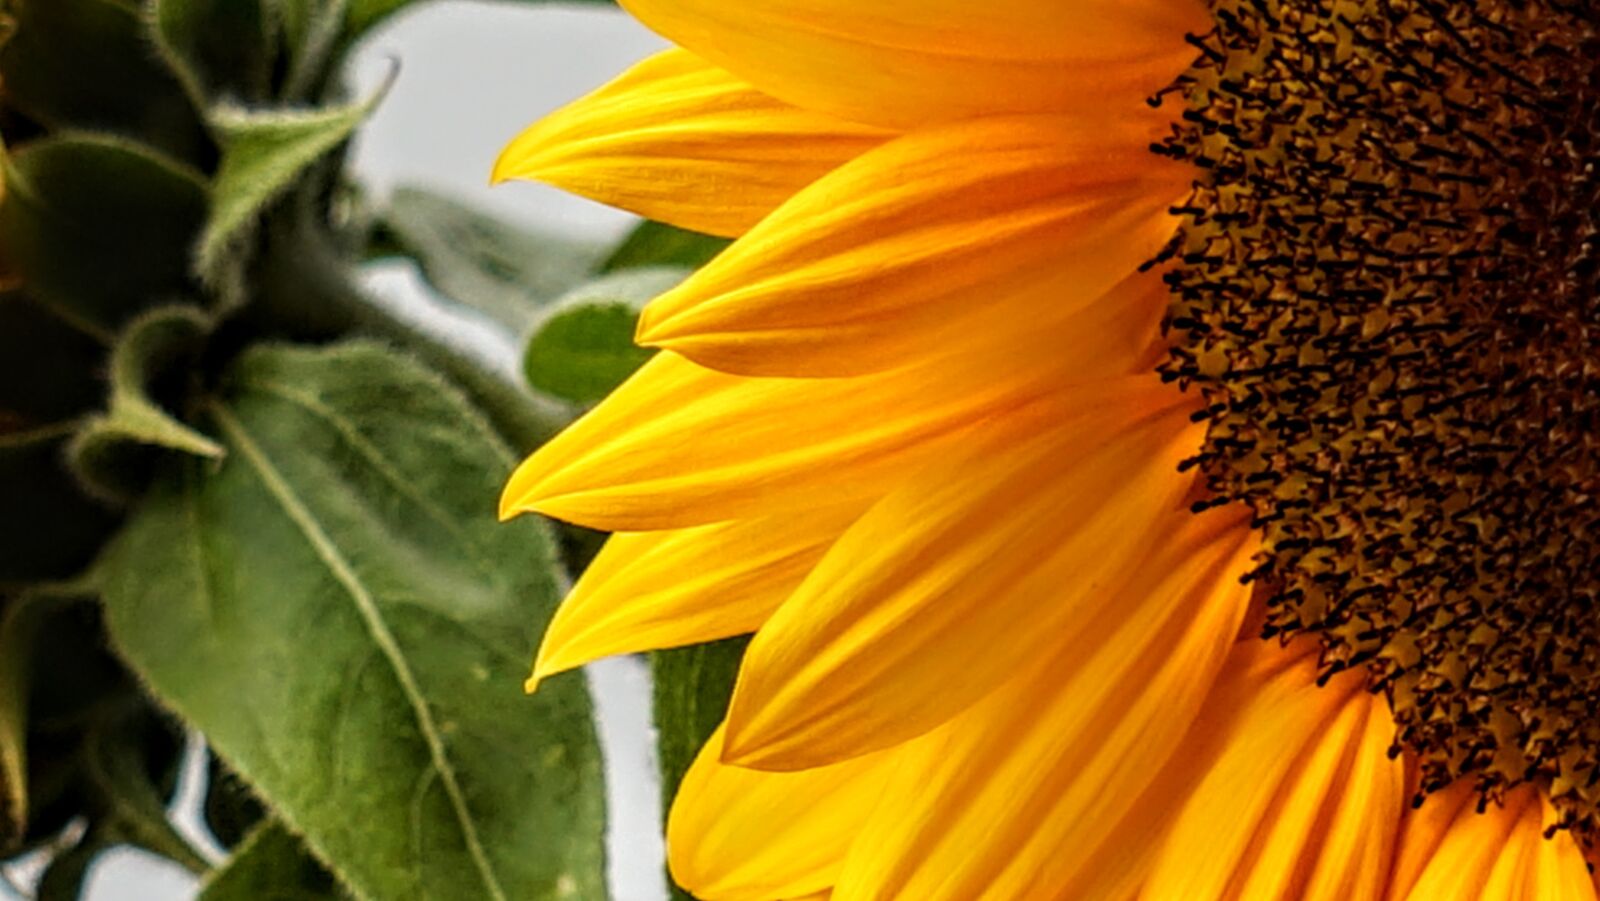 Sony a7 sample photo. Sunflower, nature, yellow photography